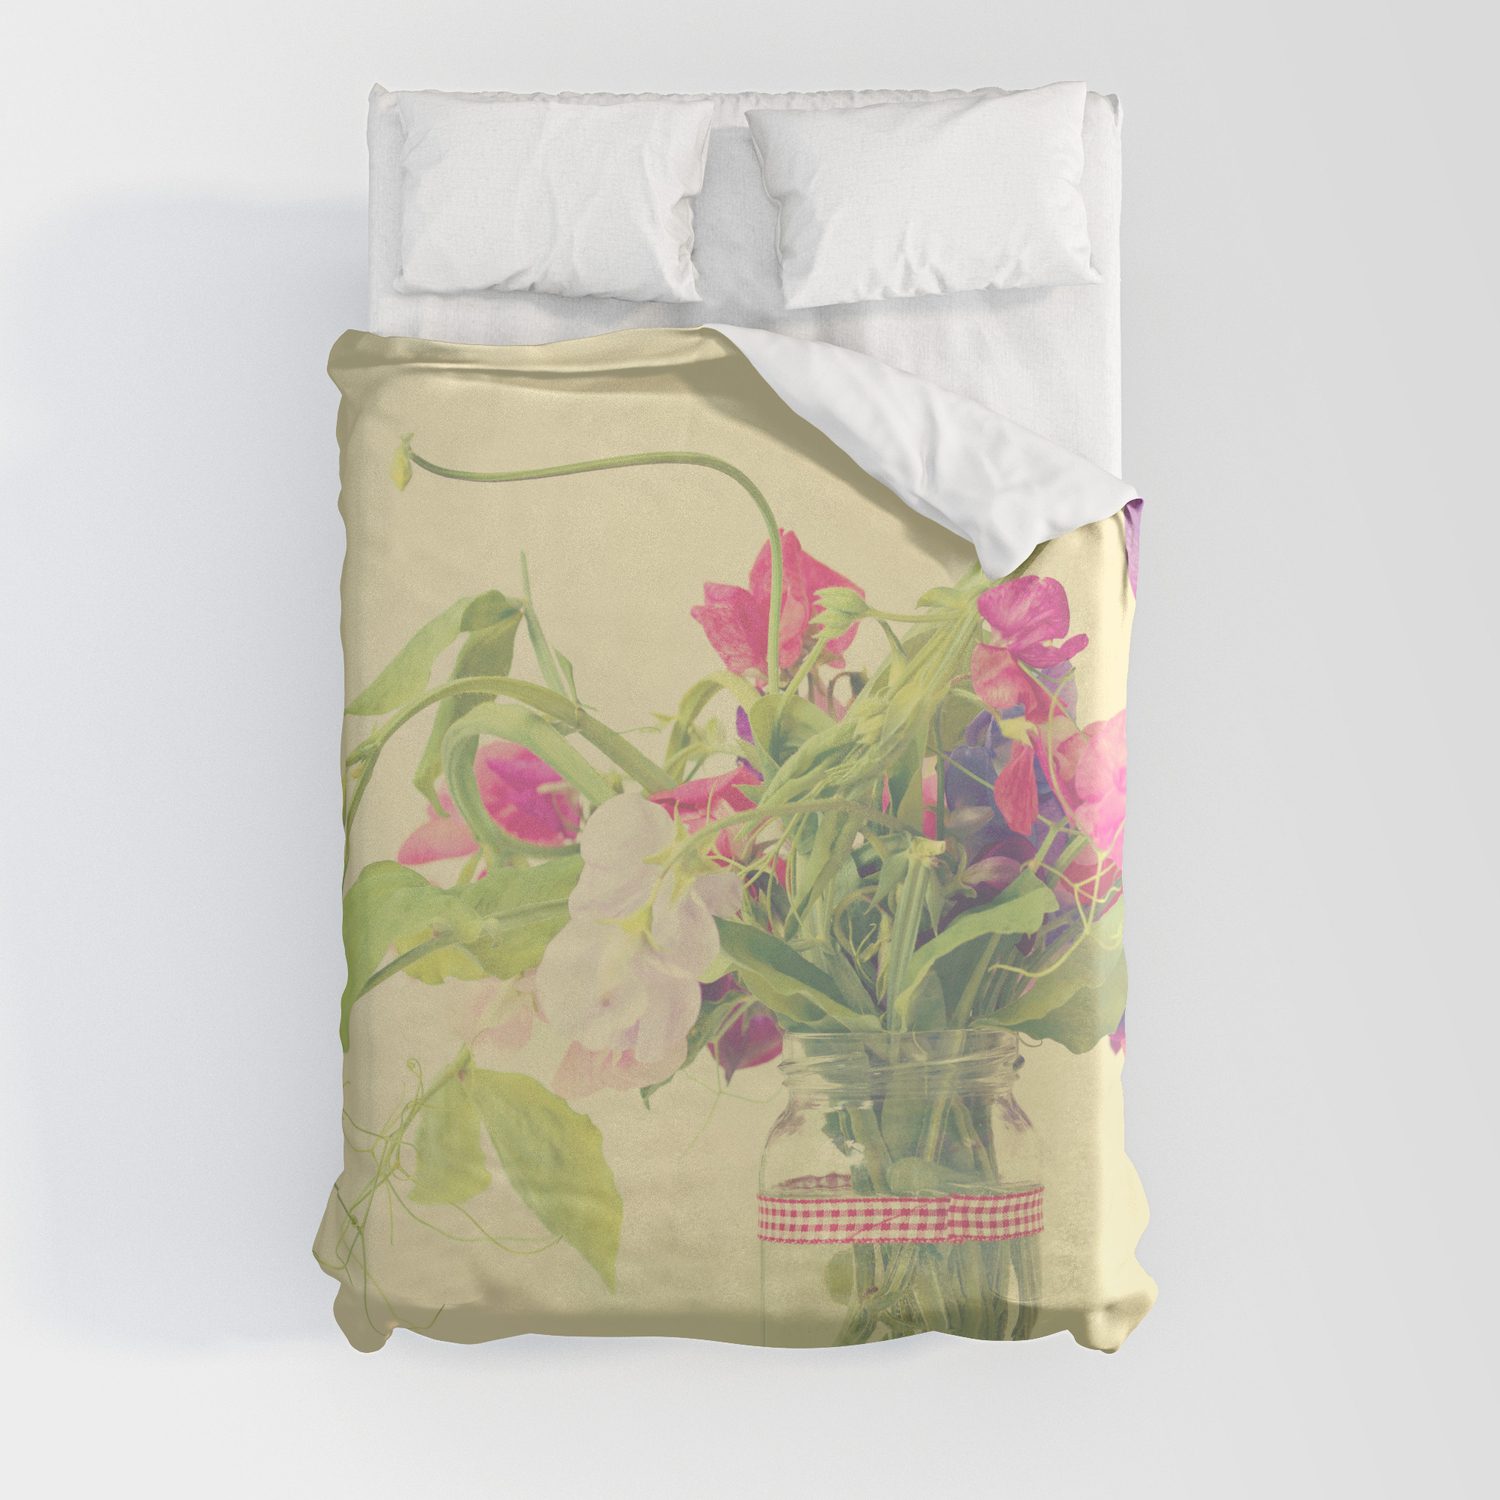 Duvet Cover By Designs Susy Society6, Sweet Pea Duvet Cover